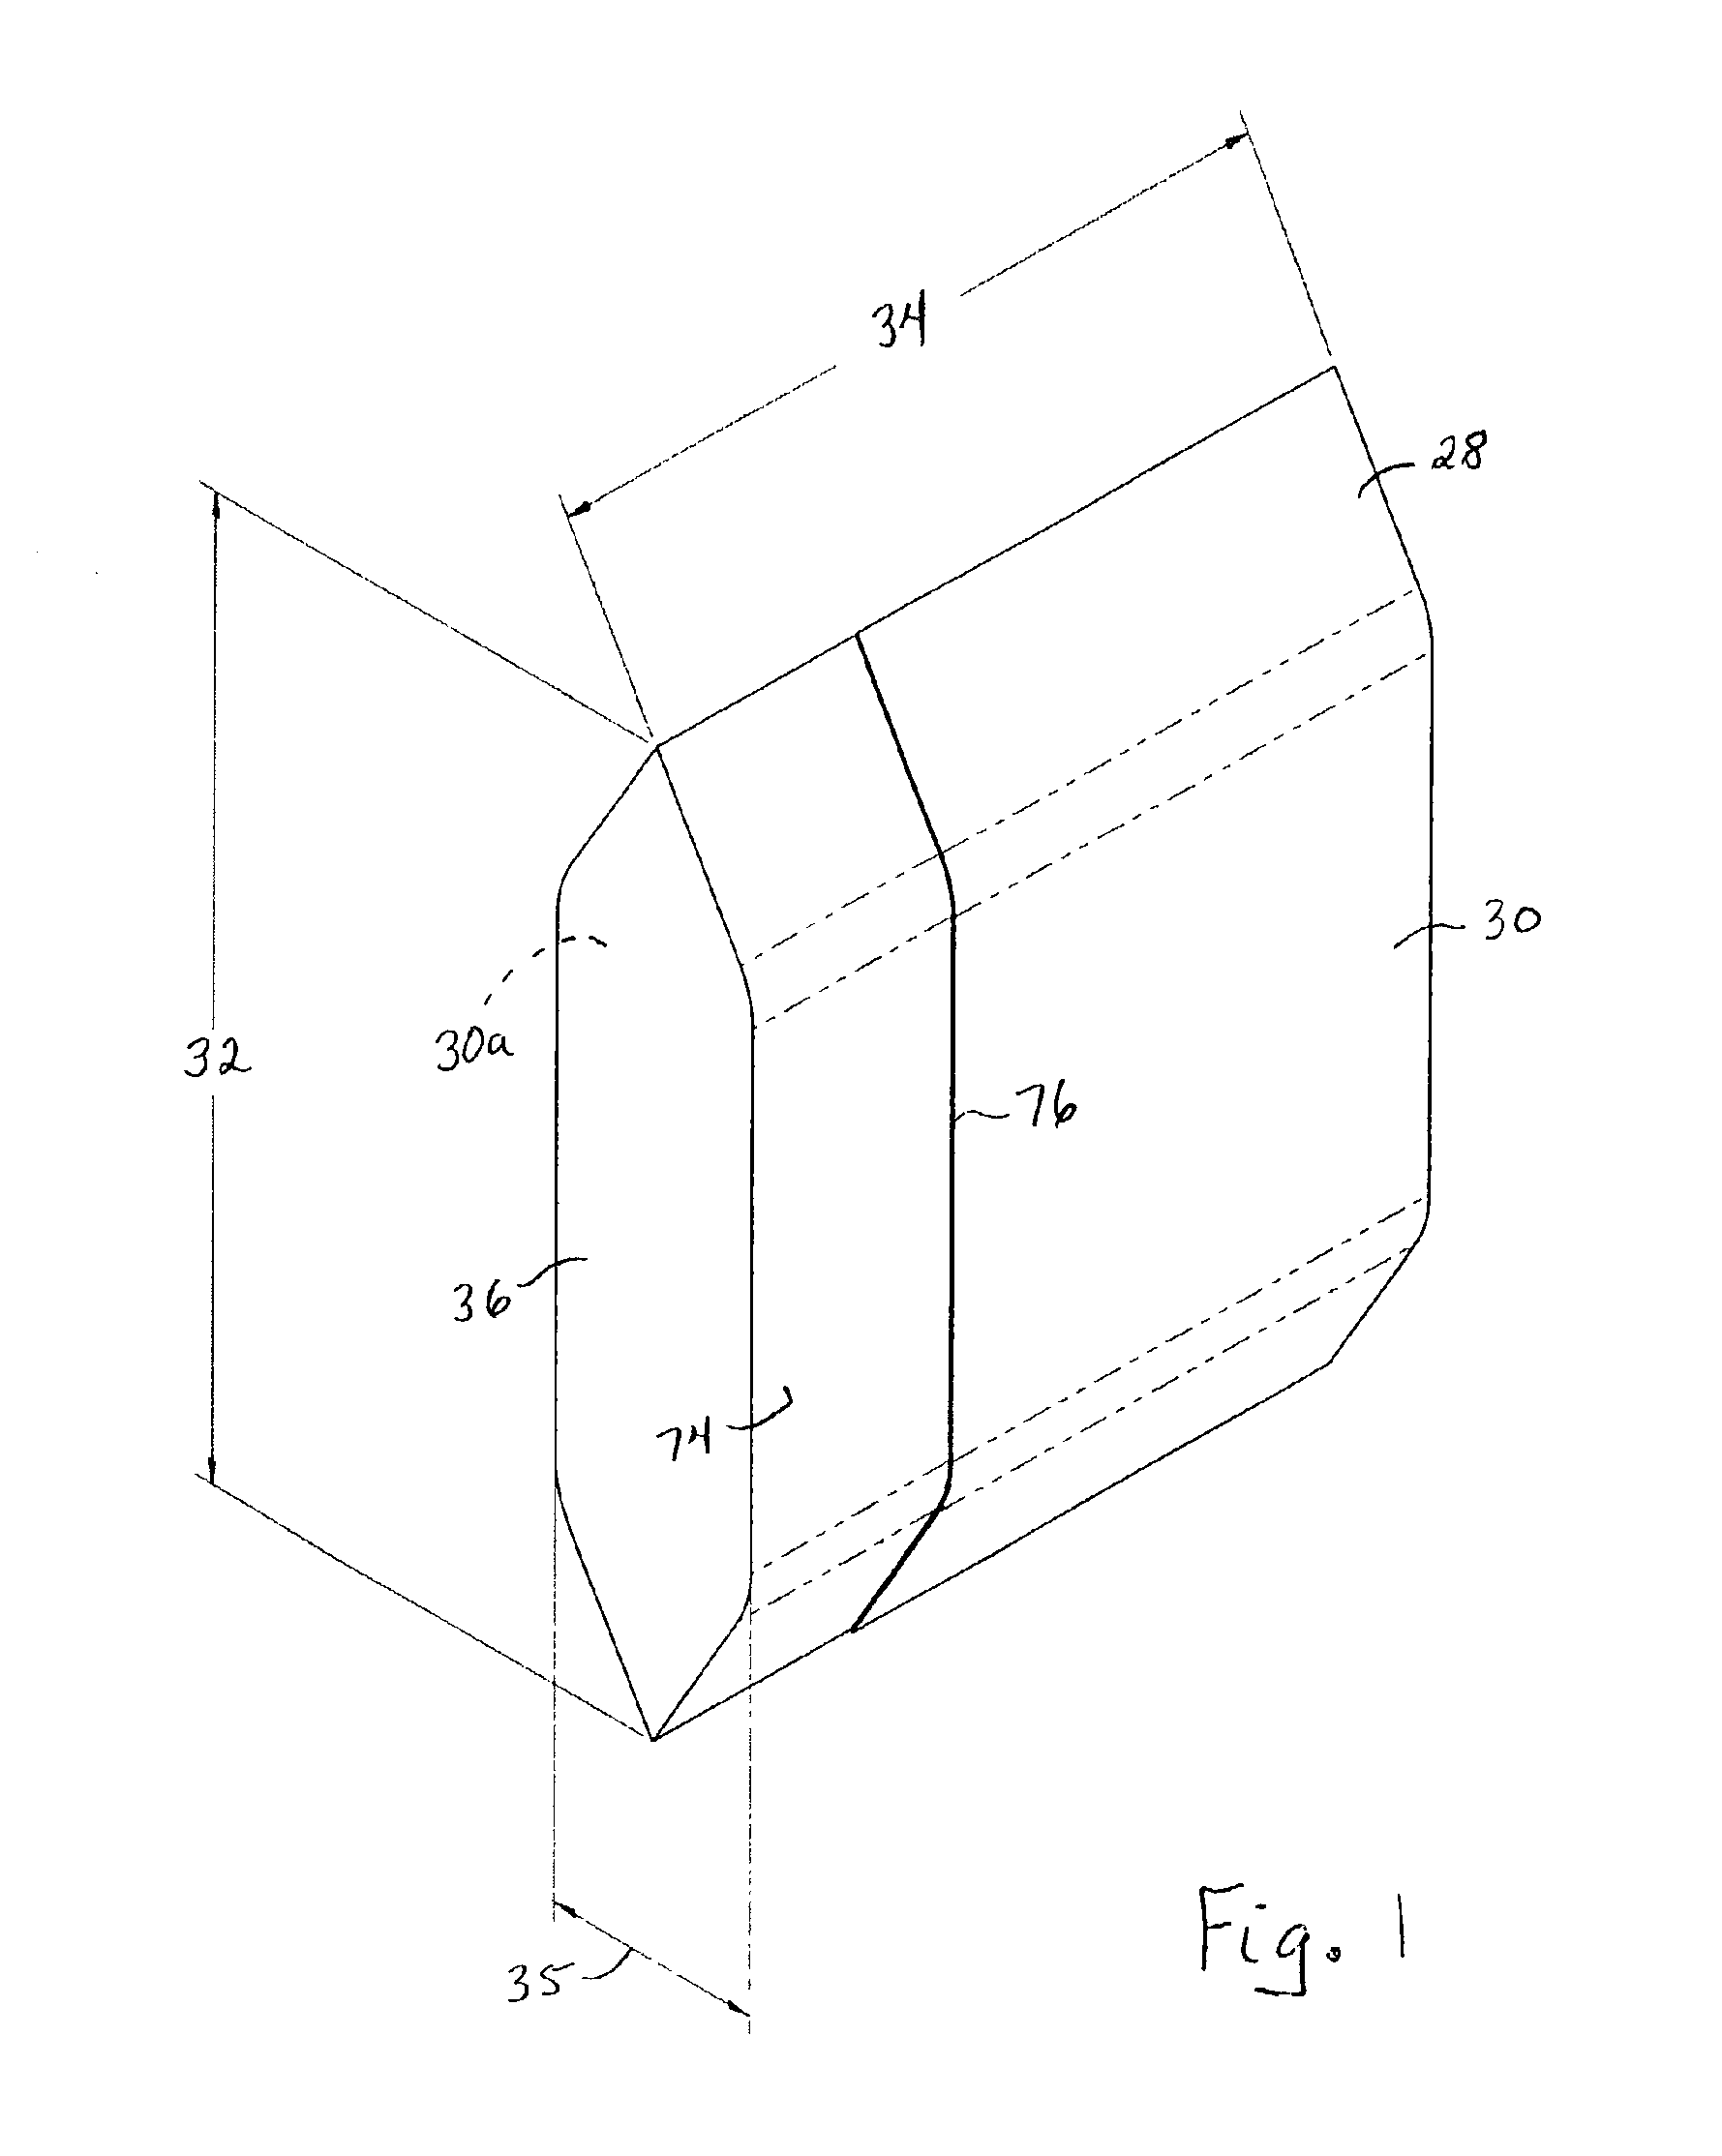 Positioning system for an automatic accumulation system